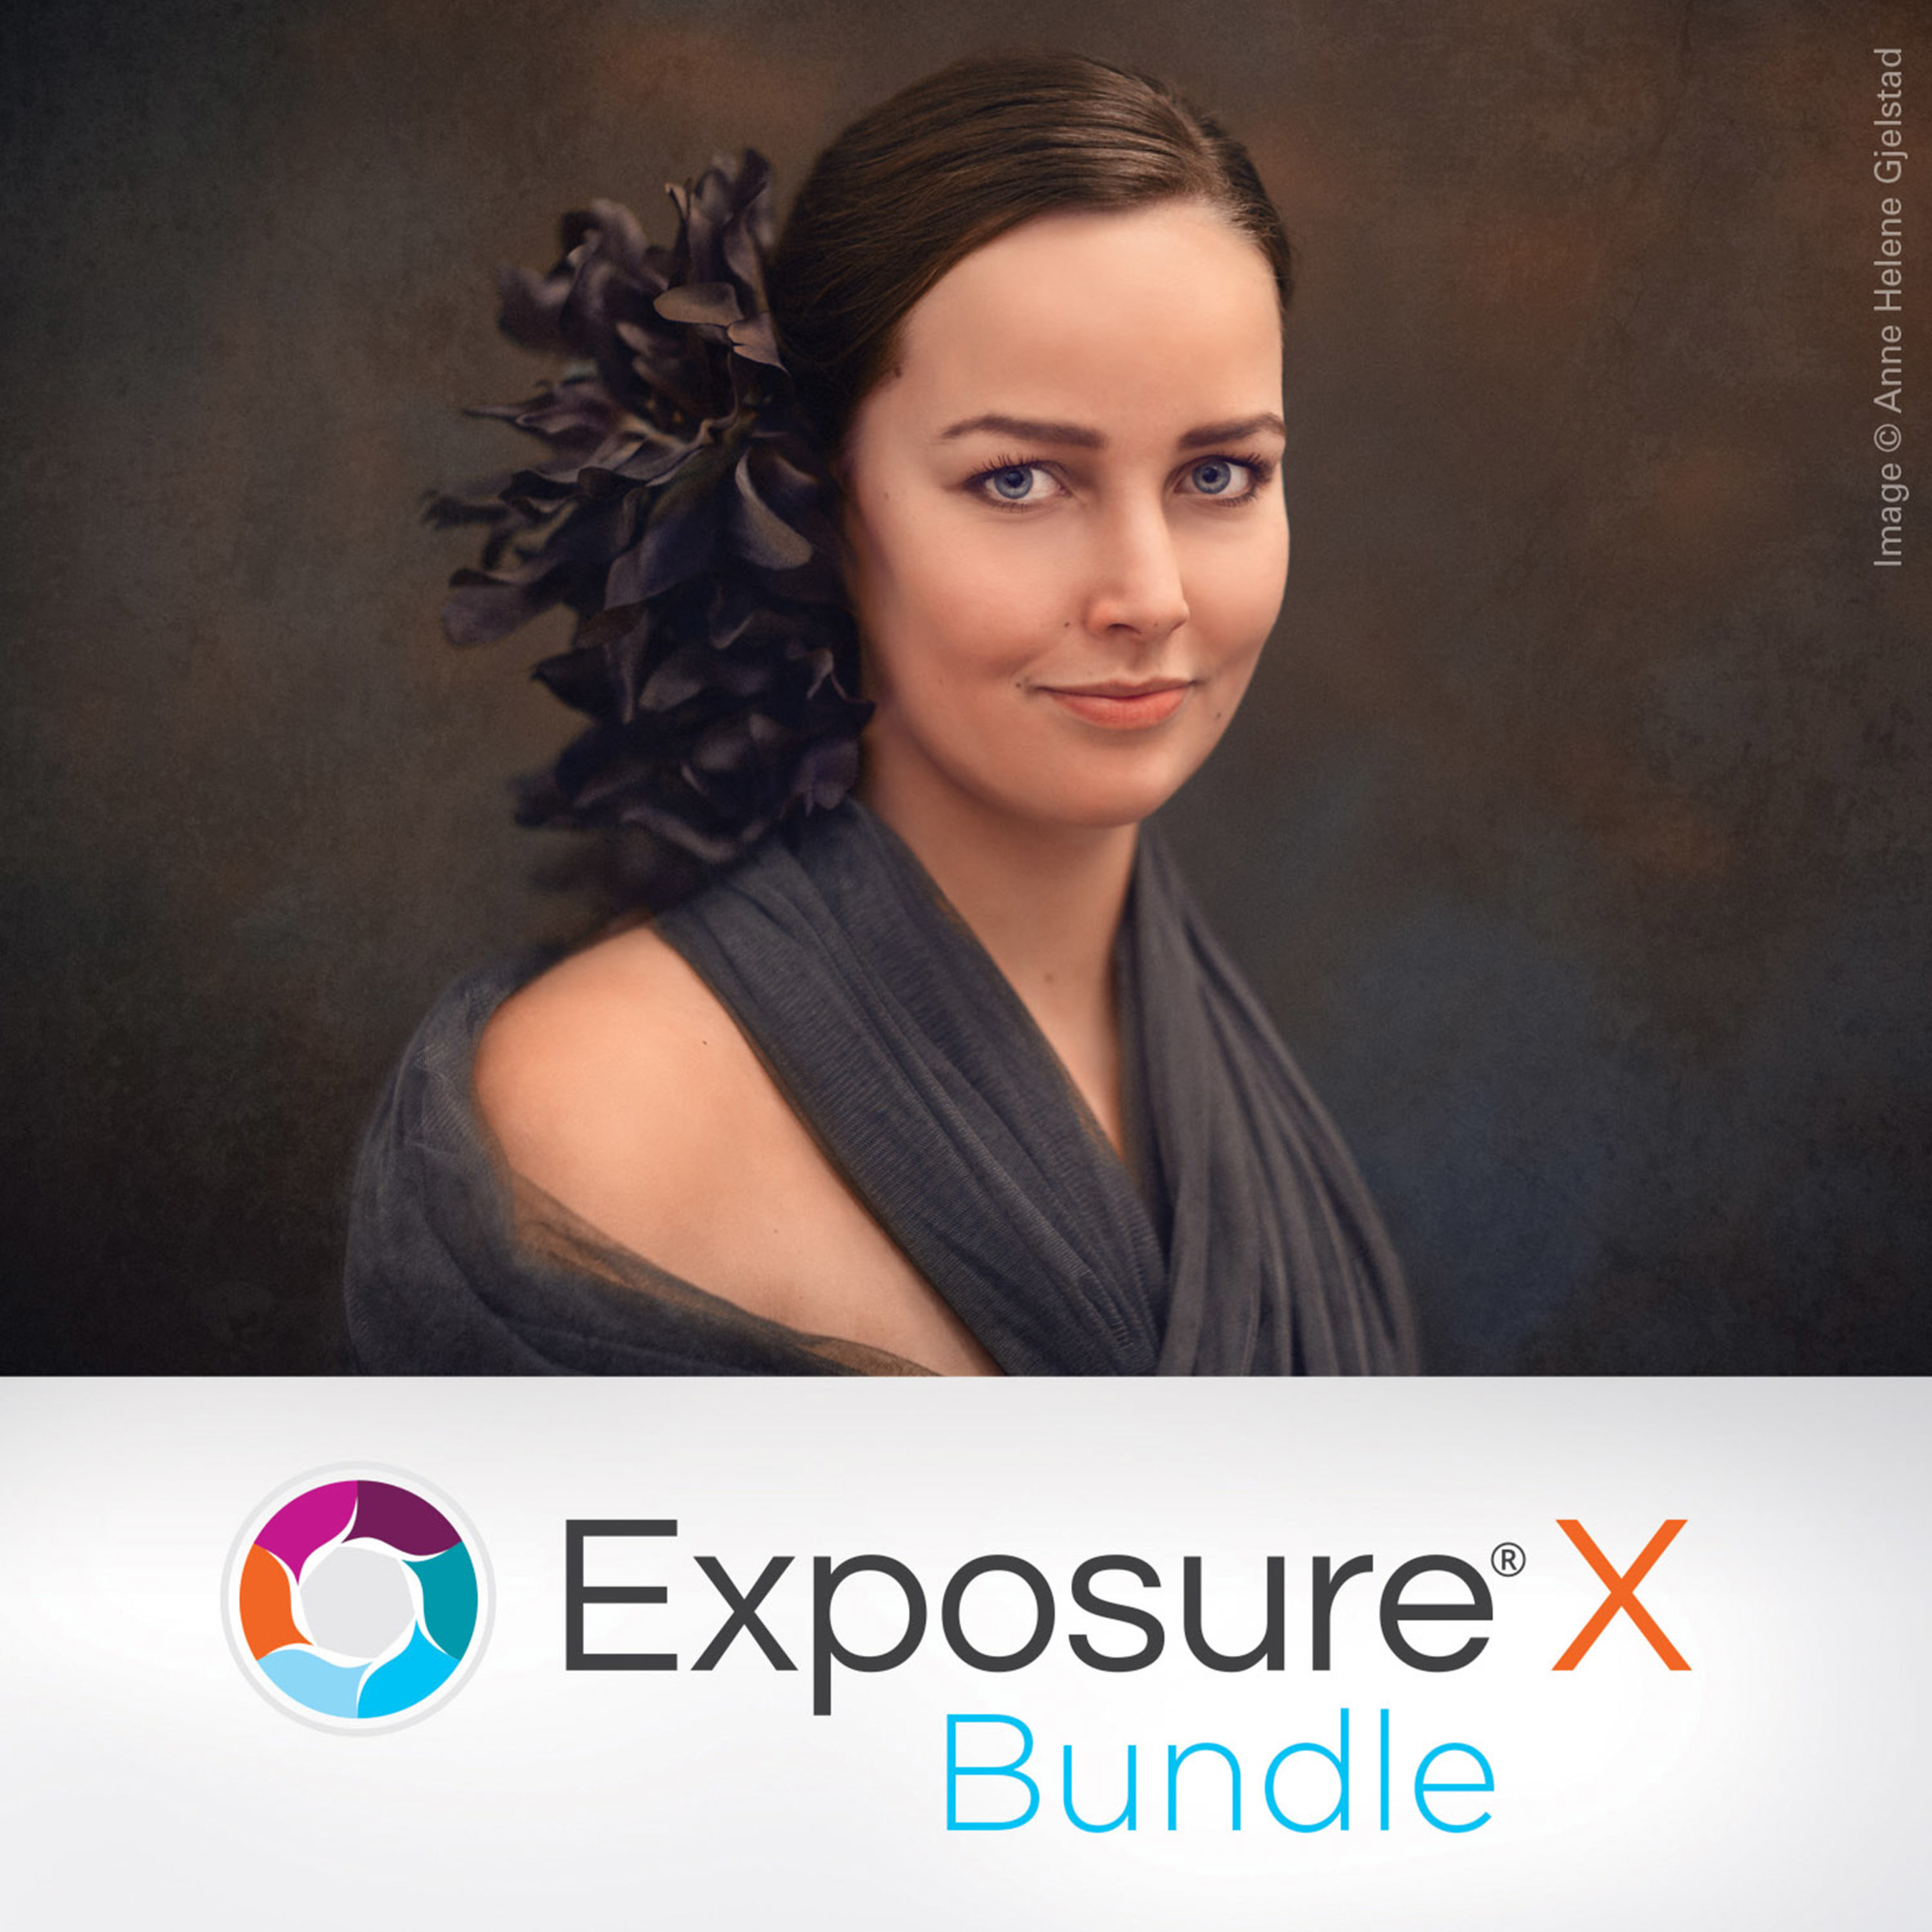 Alien Skin Software Announces the Exposure X Bundle.  Three award-winning photo editing apps integrated into a single product that helps photographers quickly organize, edit, and enhance their photos.